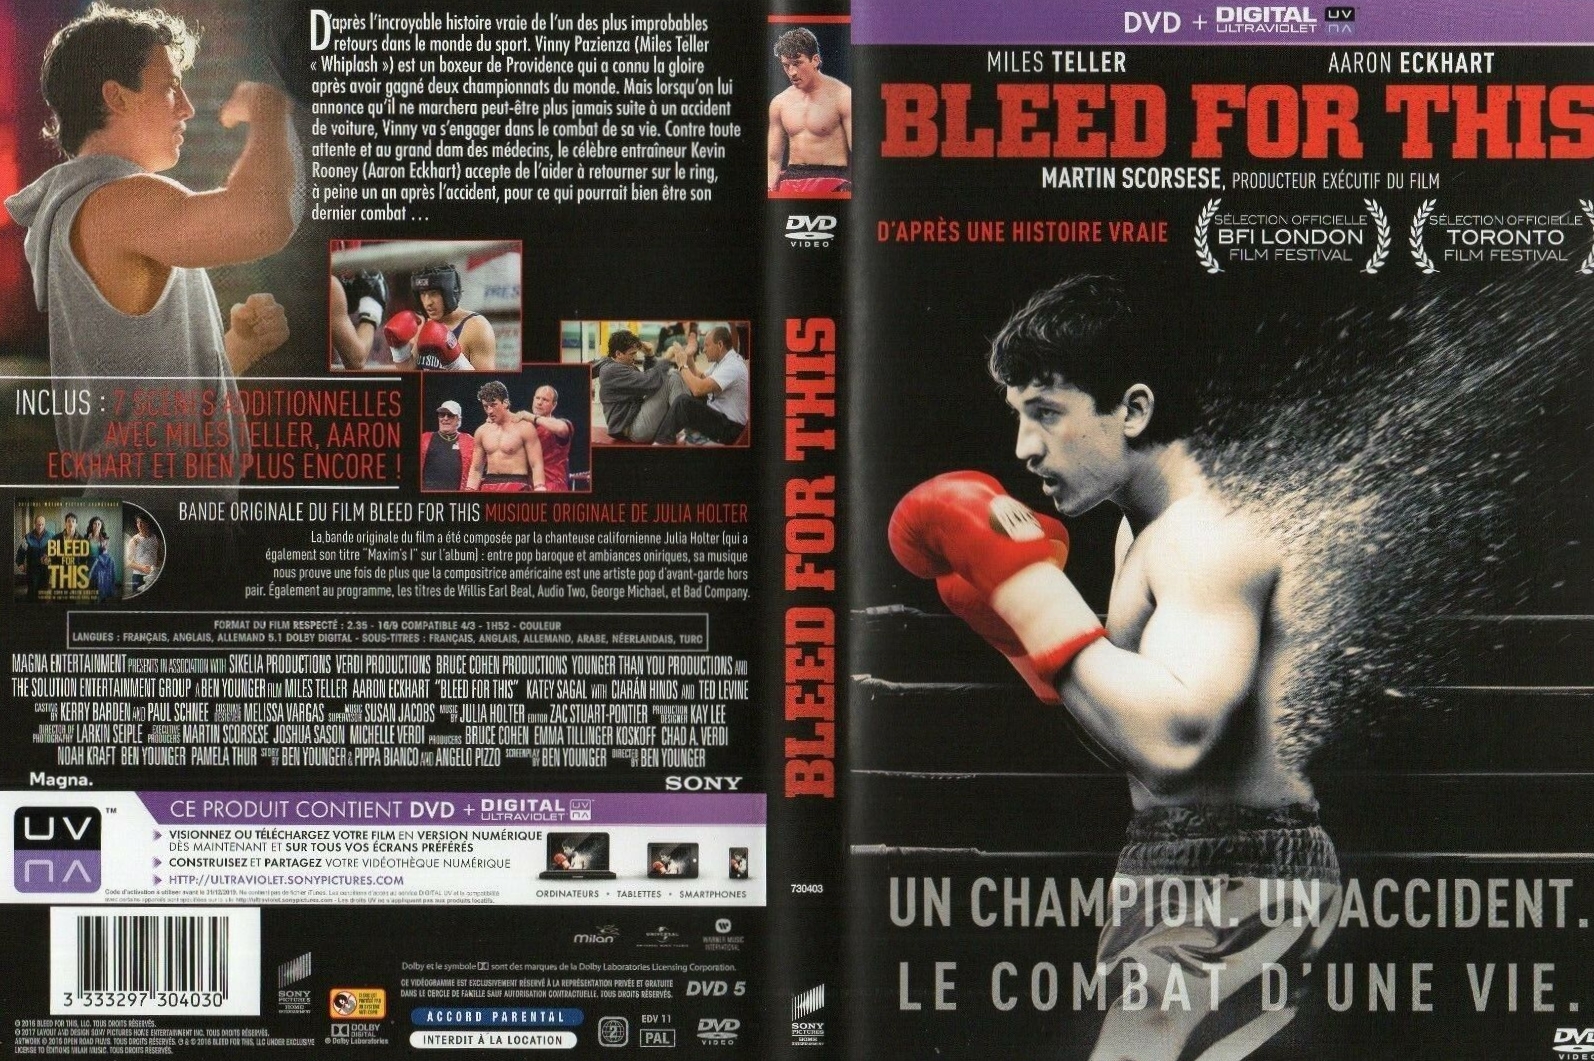 Jaquette DVD Bleed for this